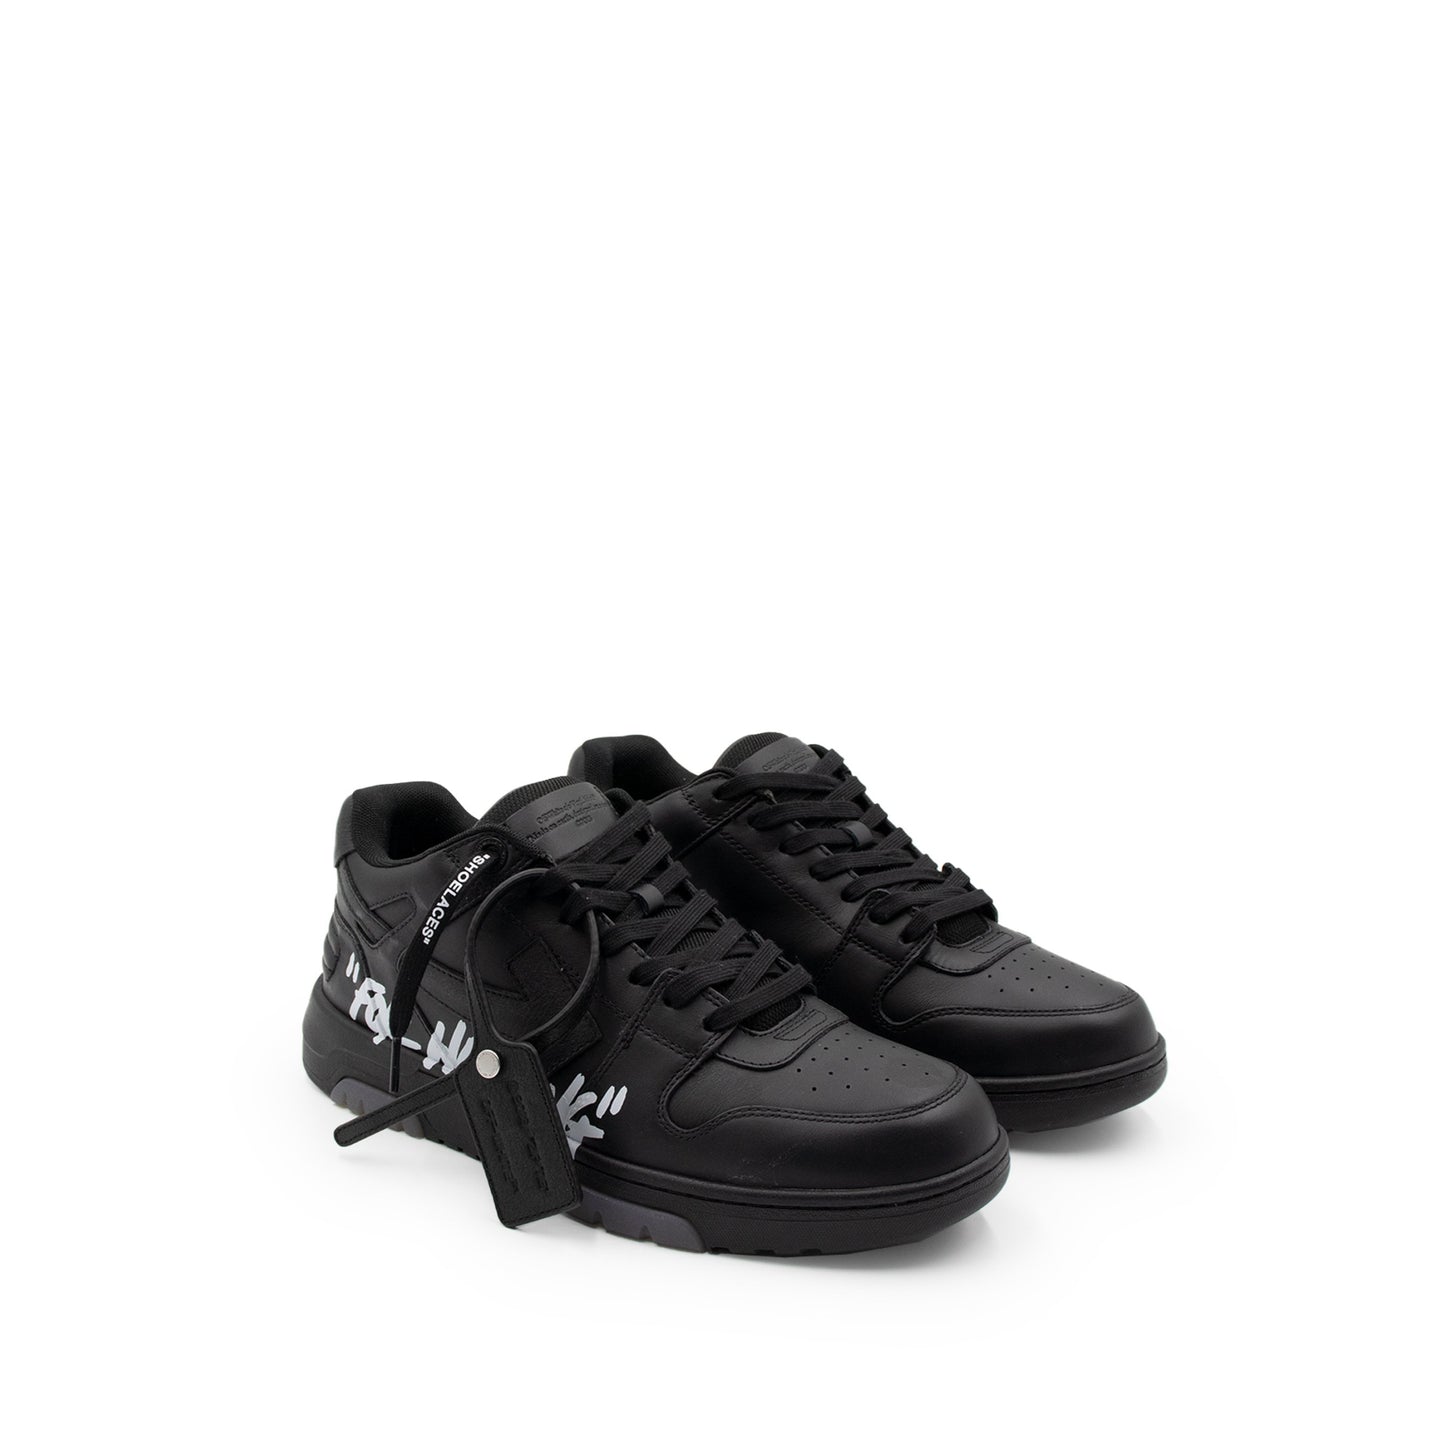 Out Of Office Sneakers "For Walking" in Black & White